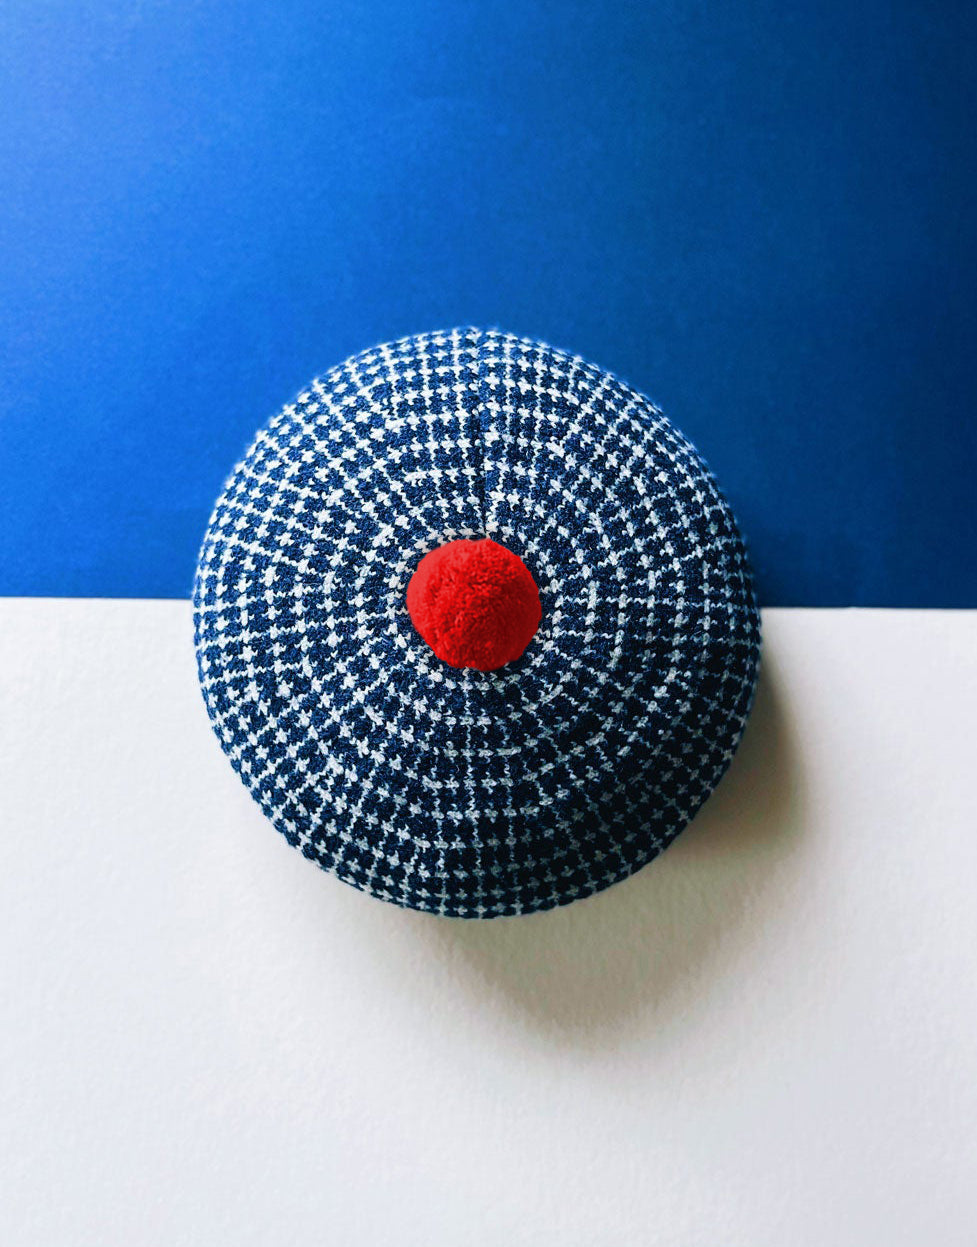 Beret Hat - Tattersall Plaid Navy Blue and Cream with Bright Red Pom Pom